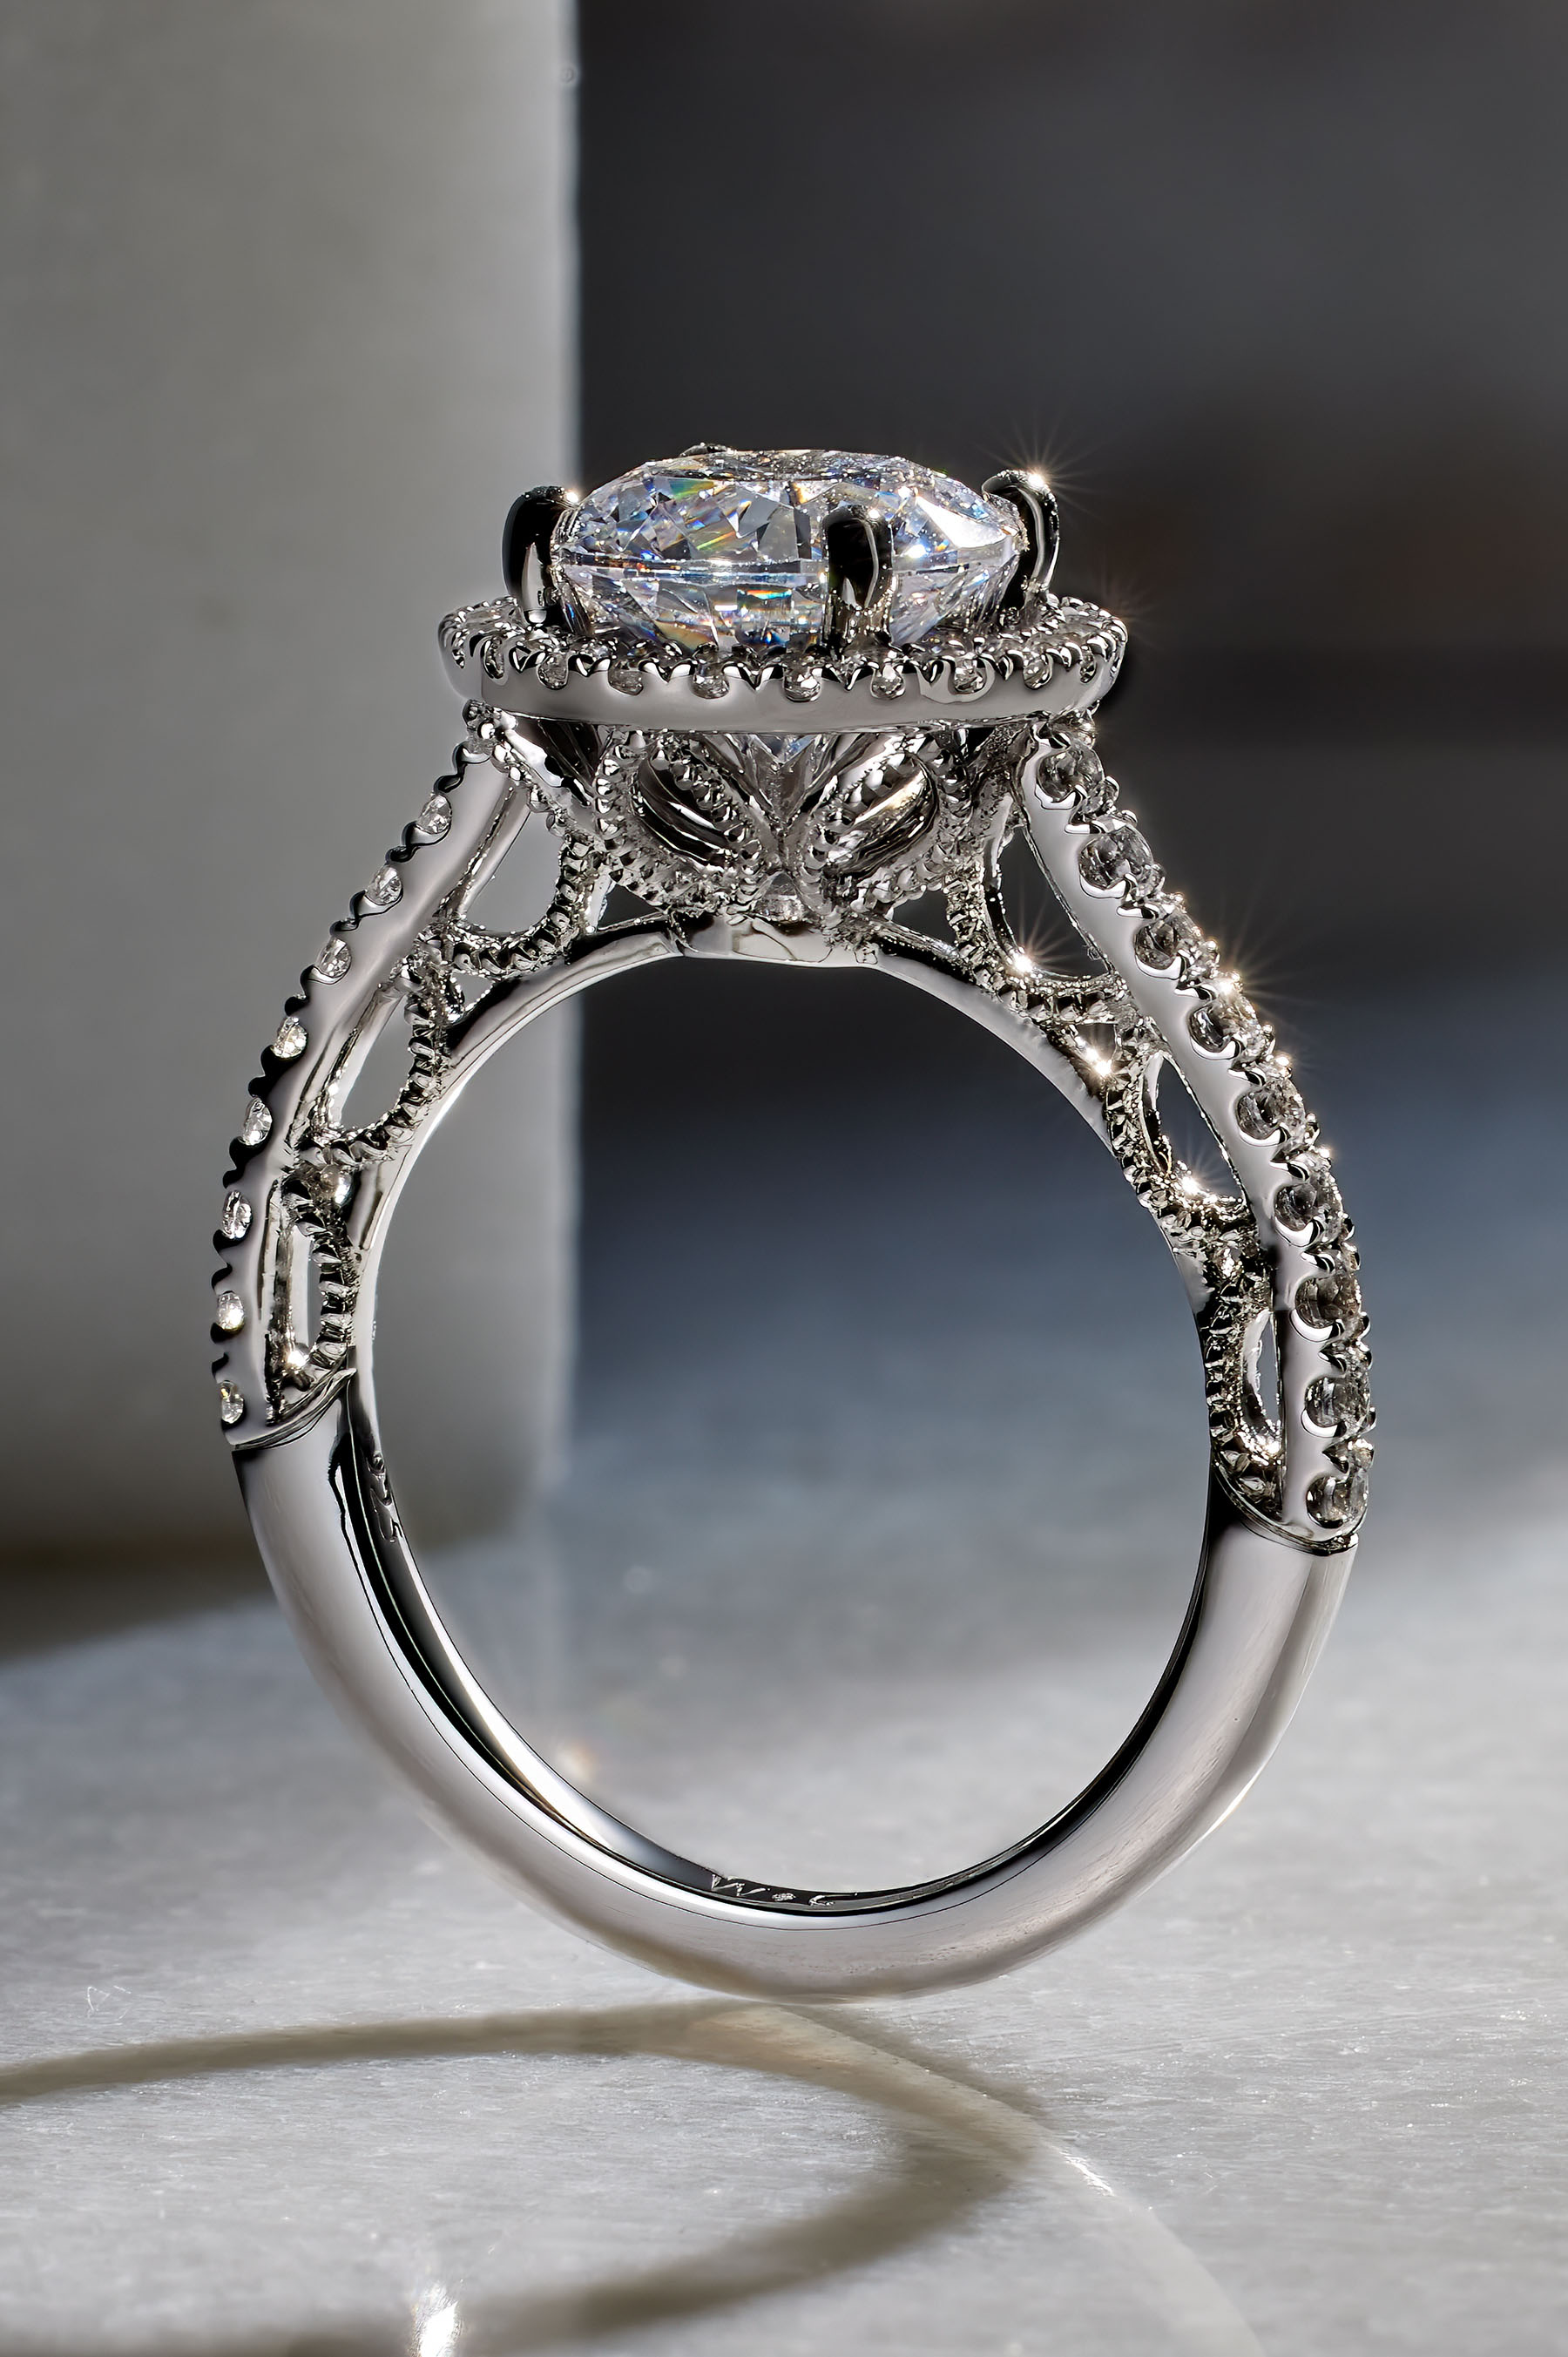 10 Gorgeous Vintage Inspired Engagement Rings from With Clarity